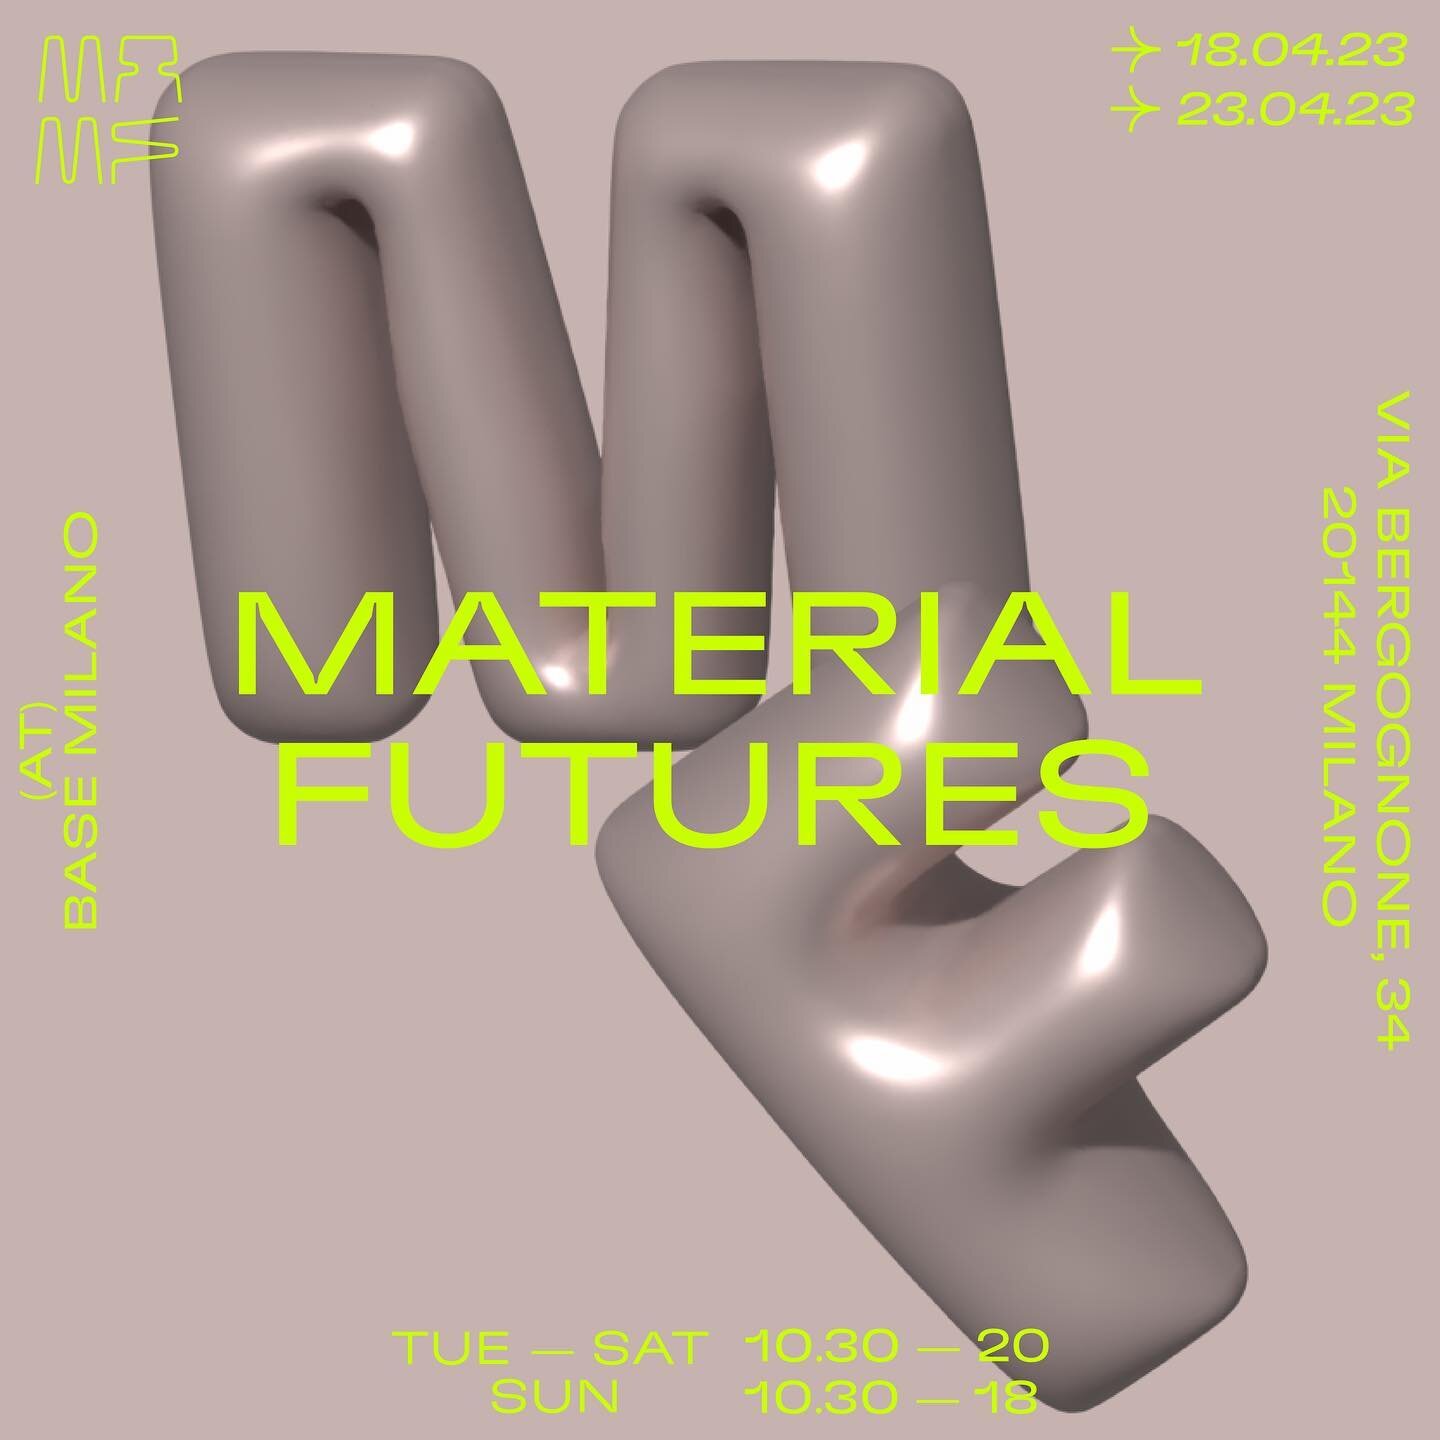 We&rsquo;re setting our clocks forward one hour because it&rsquo;s finally time&hellip;
🇮🇹MA MATERIAL FUTURES IS AT MILAN DESIGN WEEK 2023🇮🇹

Come and see us at BASE Milano, we might be a bit biased, but this is one not to miss 👀

Tuesday 18th A